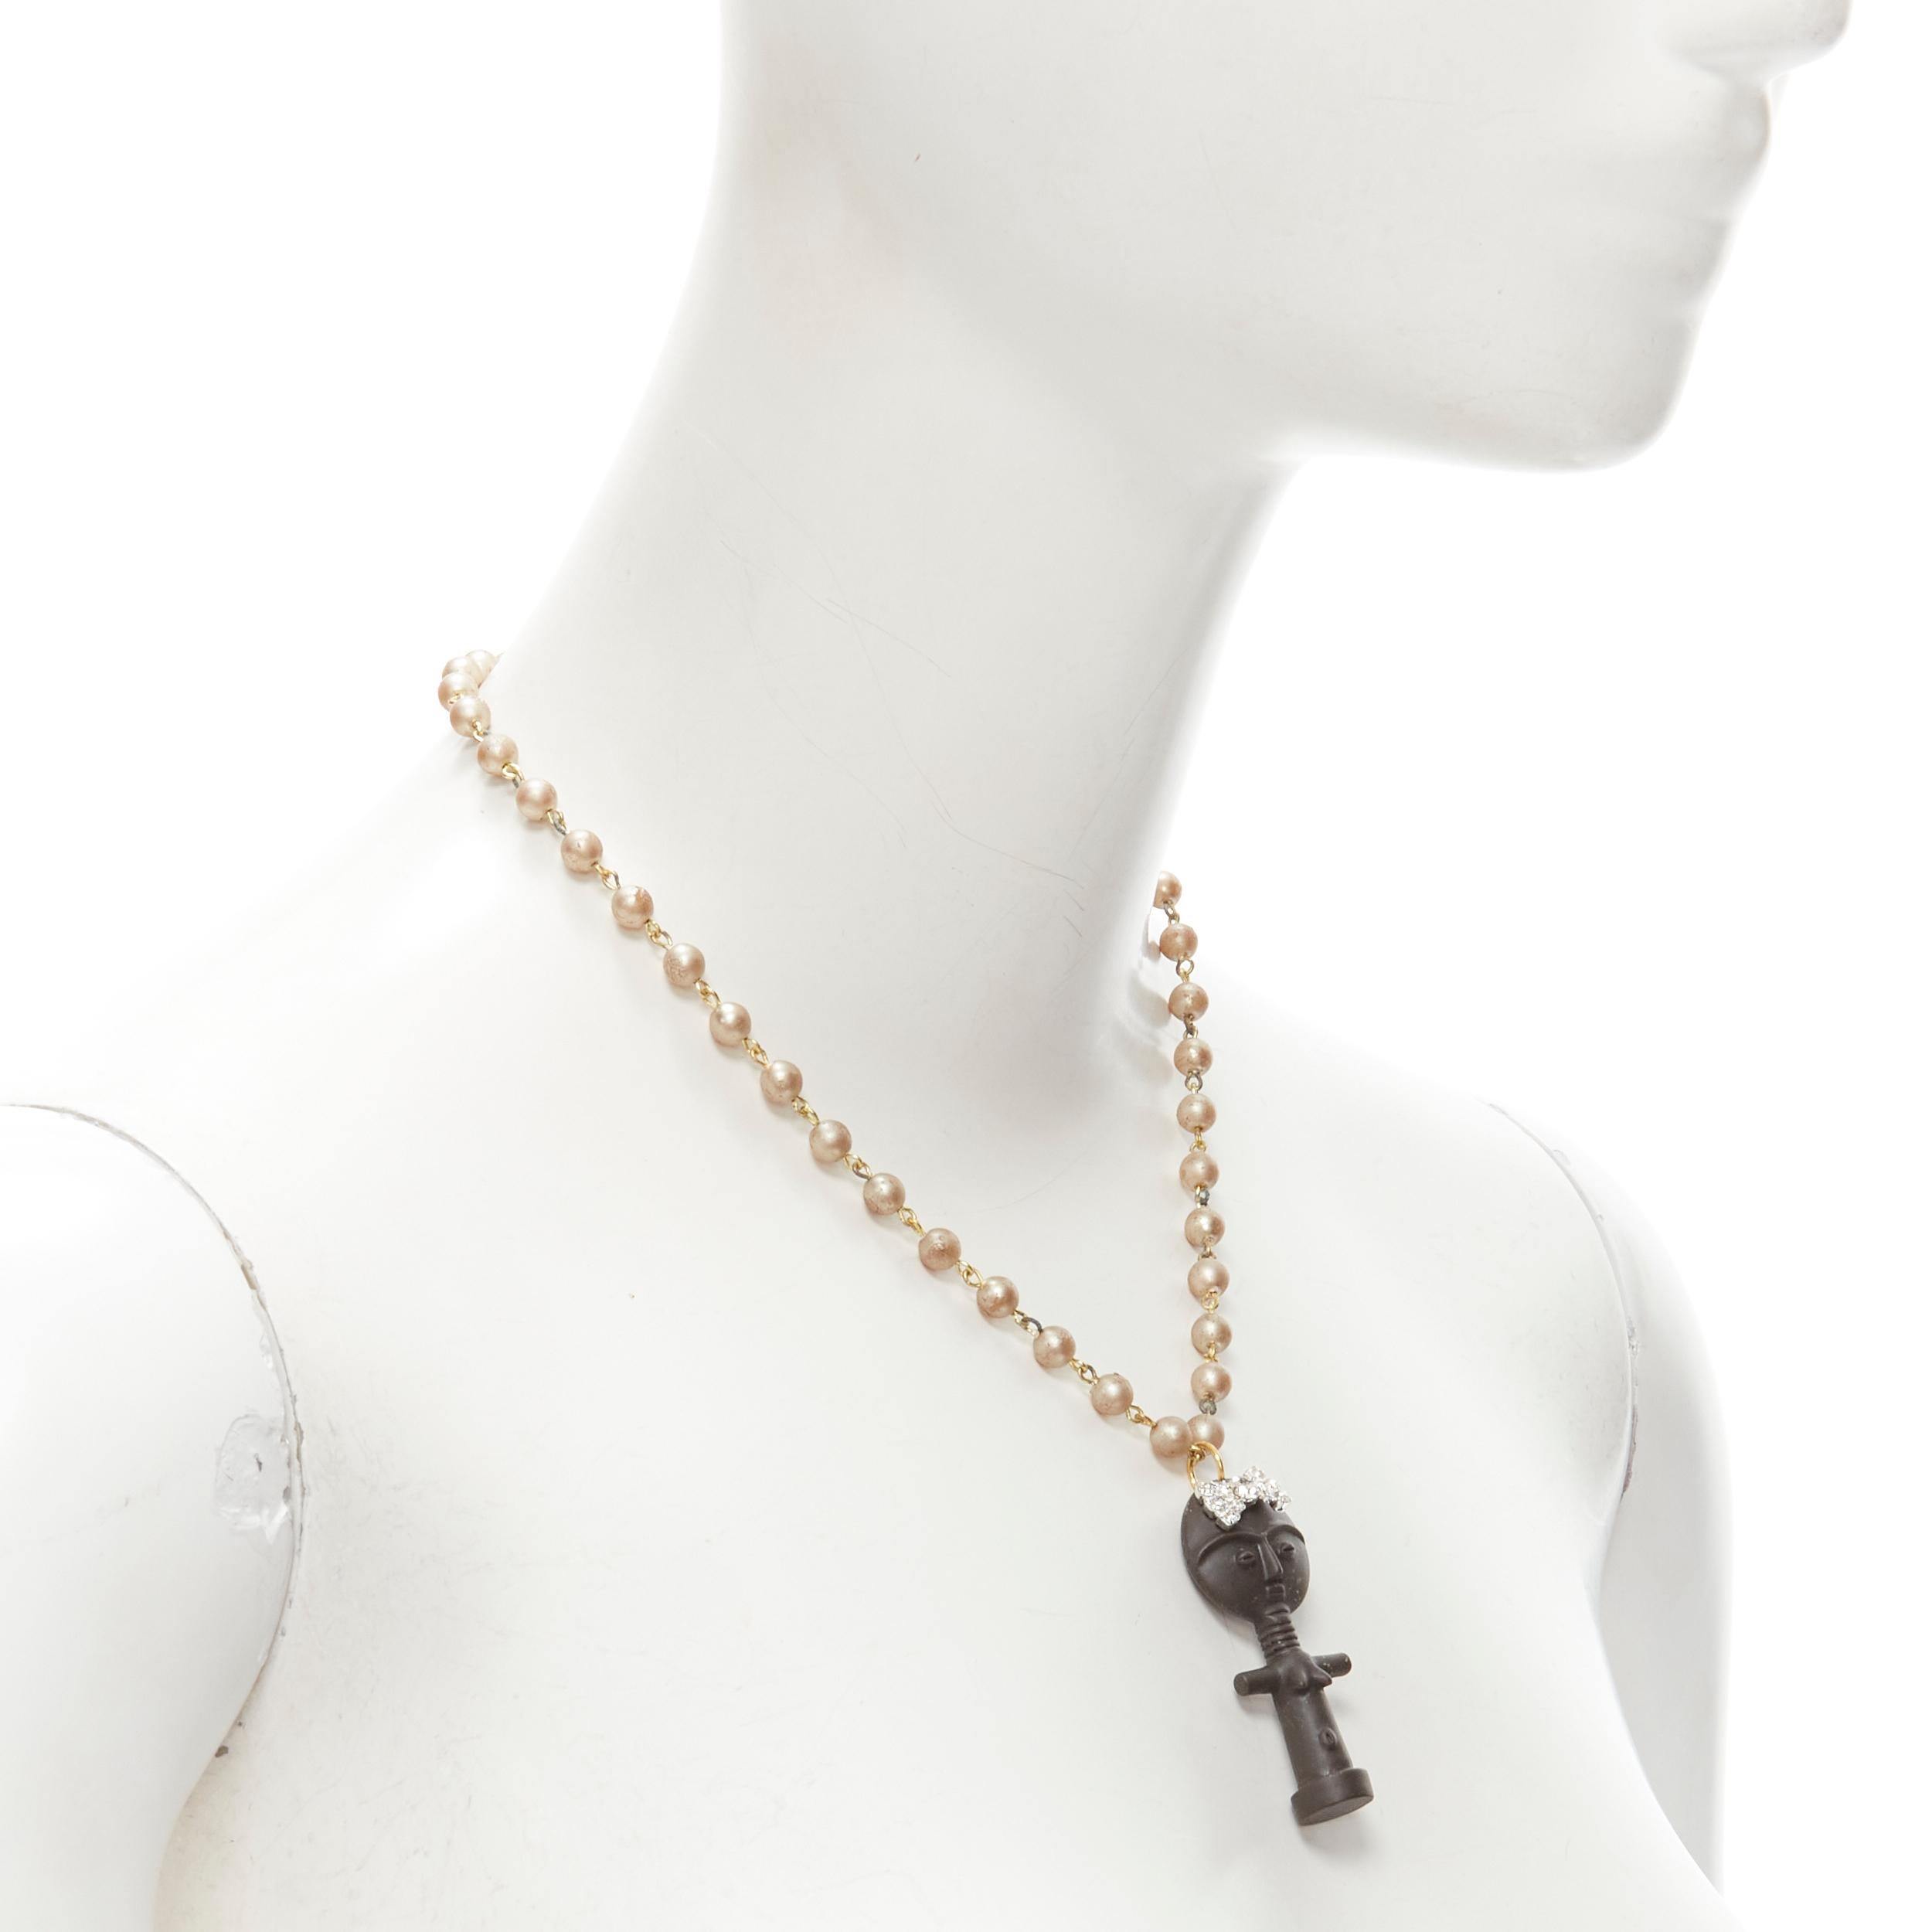 LE BIJOUX DE SOPHIE black crystal aboriginal statue pearl chain necklace
Reference: ANWU/A00319
Brand: Le Bijoux De Sophie
Material: Faux Pearl, Plastic
Color: Pearl, Black
Closure: Lobster Clasp
Extra Details: Brand logo metal